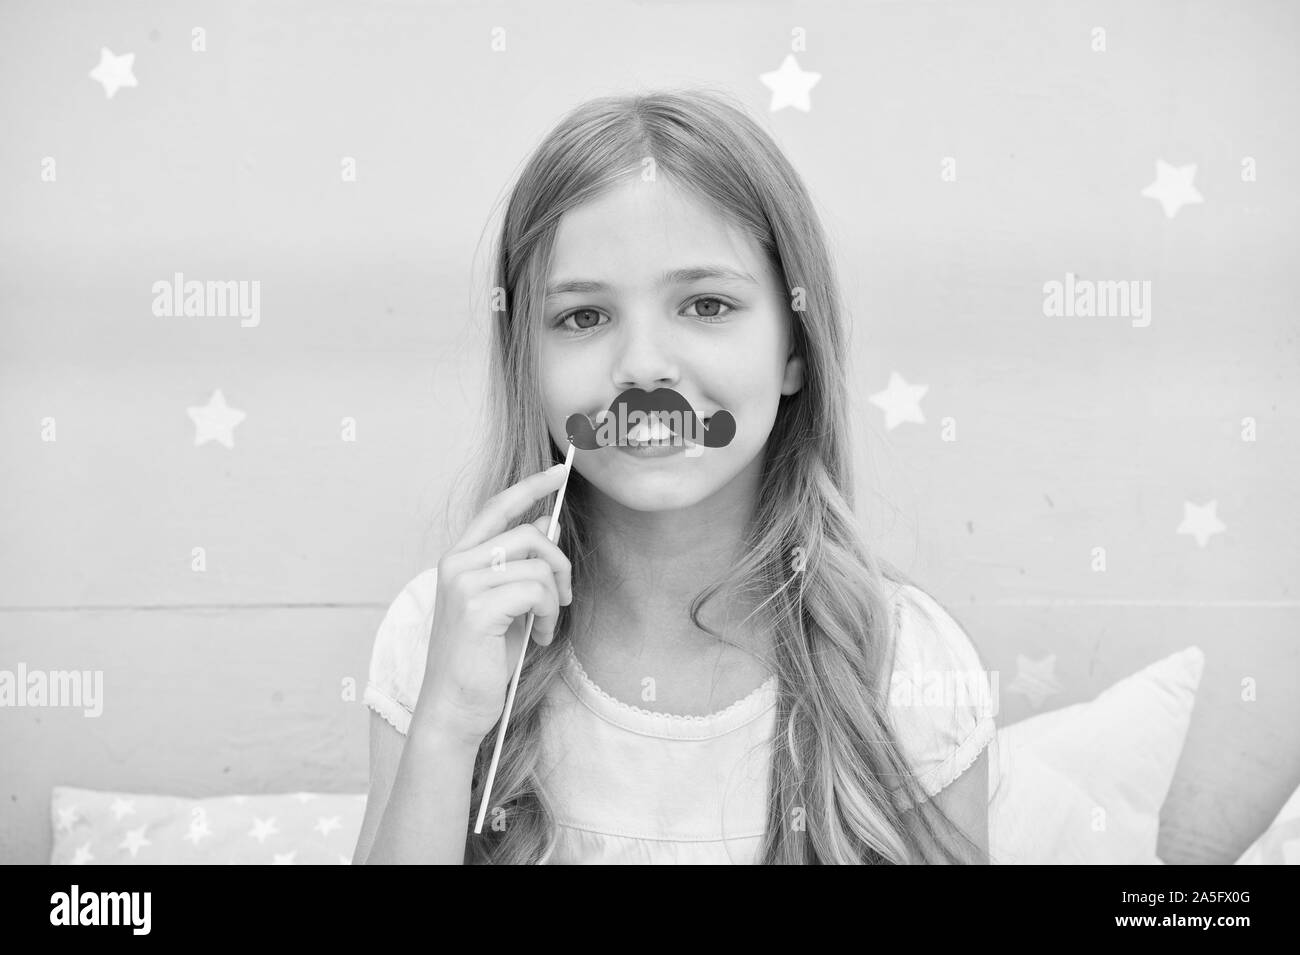 Having fun with fake mustache. Happiness and humor concept. Kid long hair happy smile face. Girl carefree child having fun with mustache. Play with mustache photo booth props. Hair care and beauty. Stock Photo